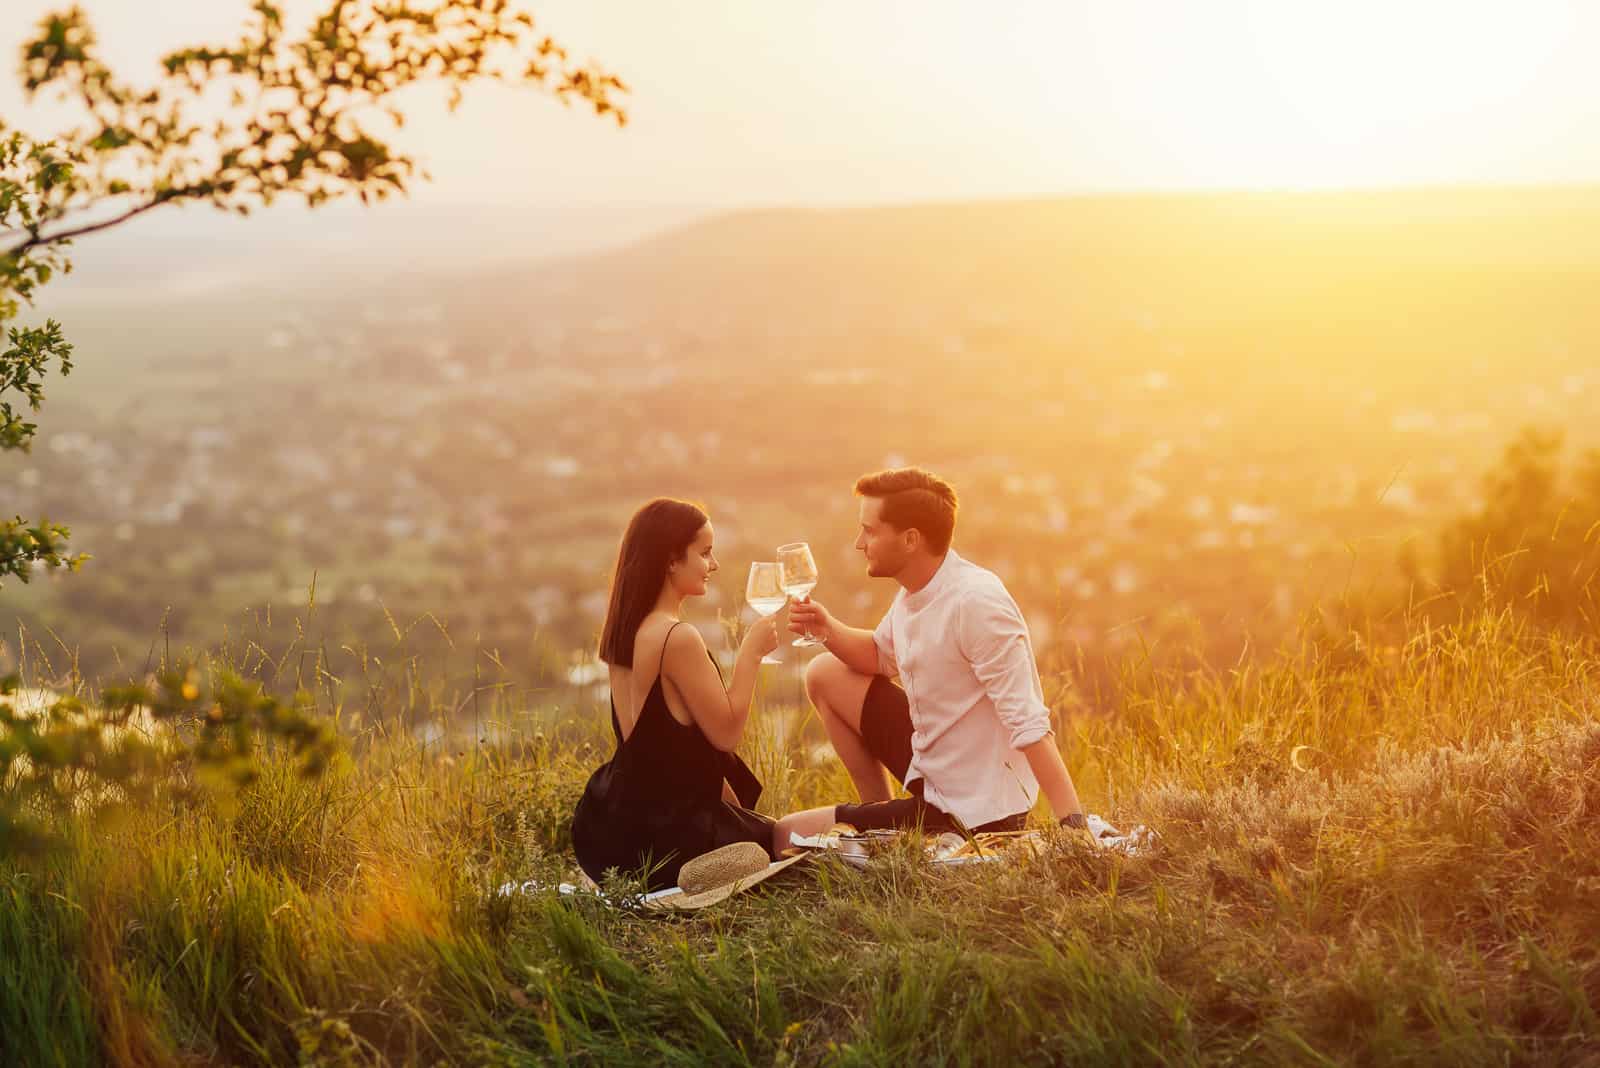 romantic picnic date on hill with view of city